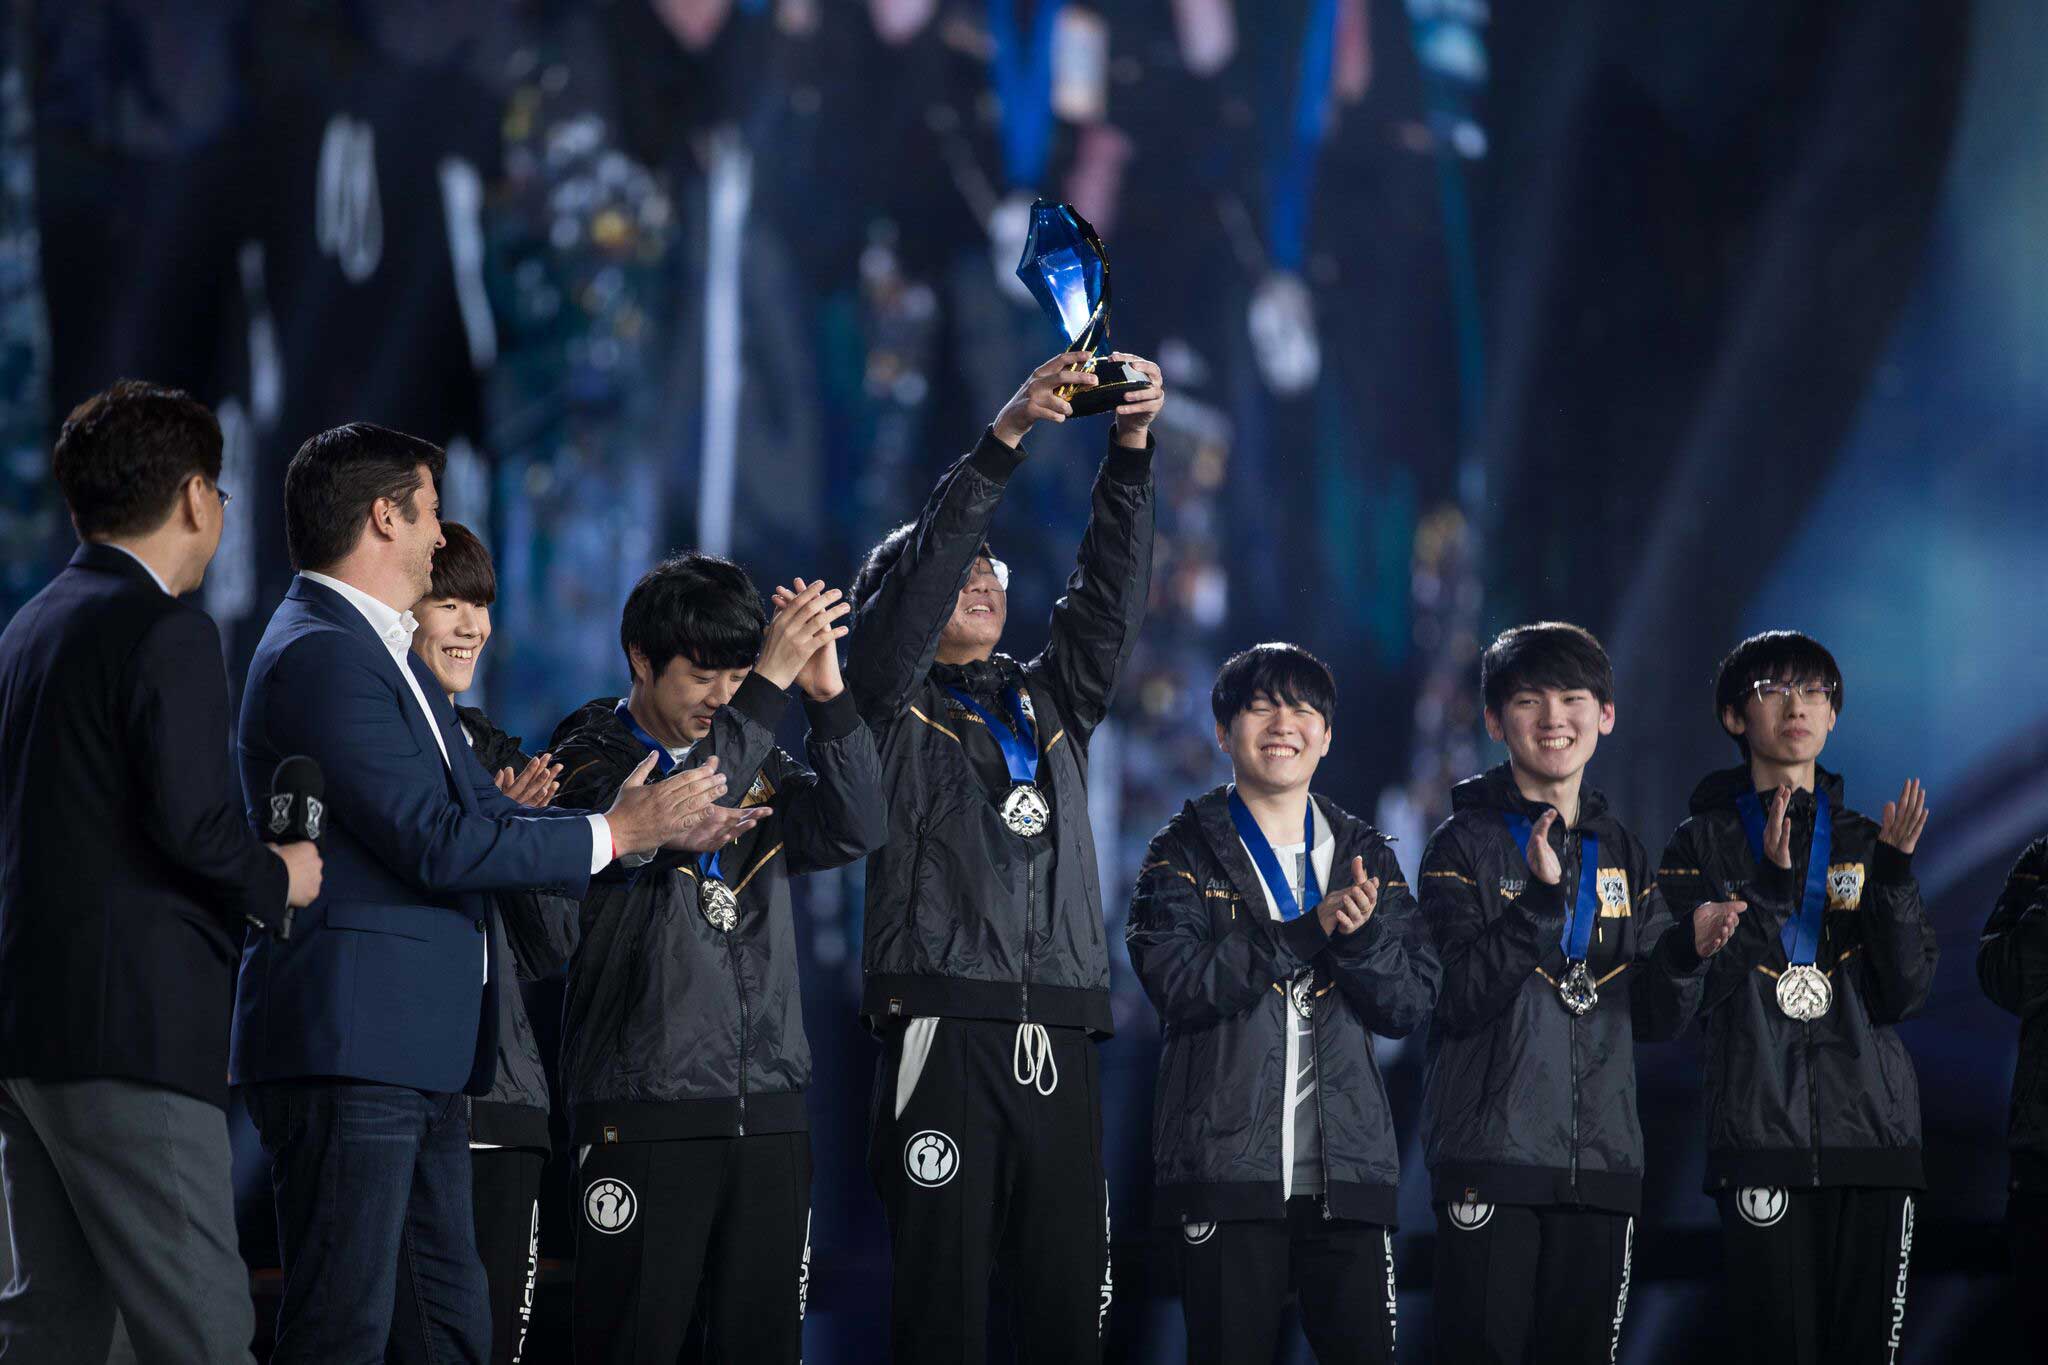 Invictus Gaming Wins League of Legends World Championship 2018